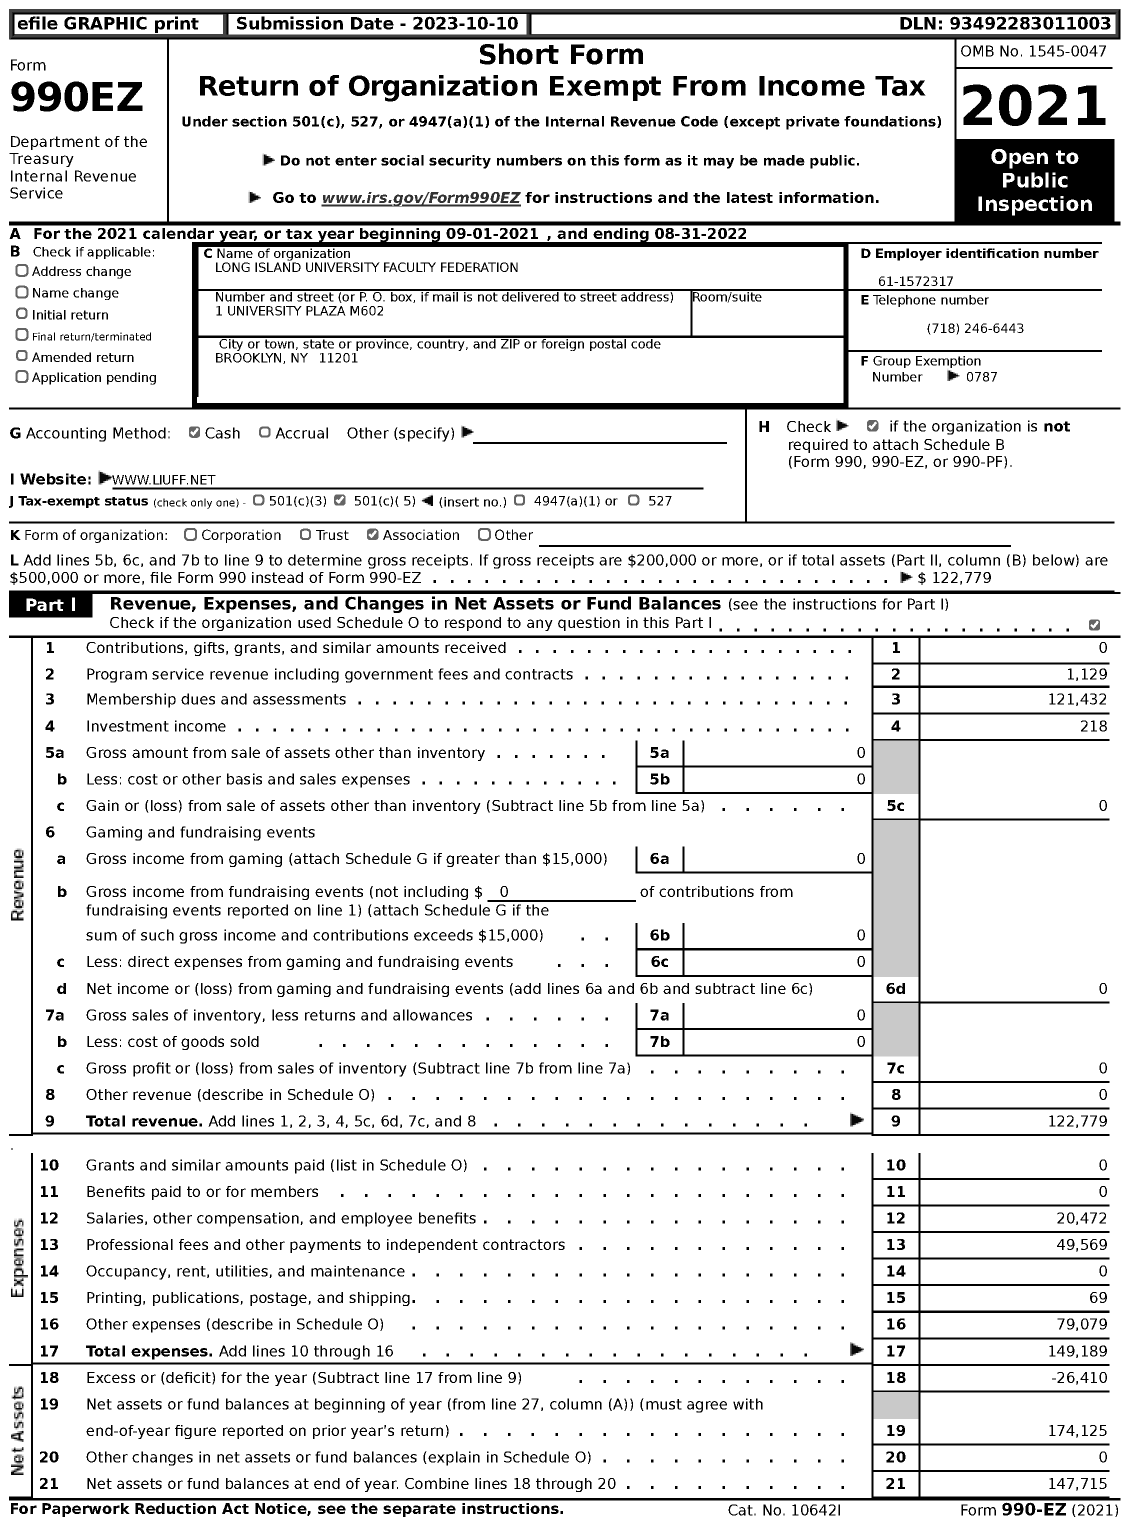 Image of first page of 2021 Form 990EZ for American Federation of Teachers - 3998 Long Island Univ Faculty Feder